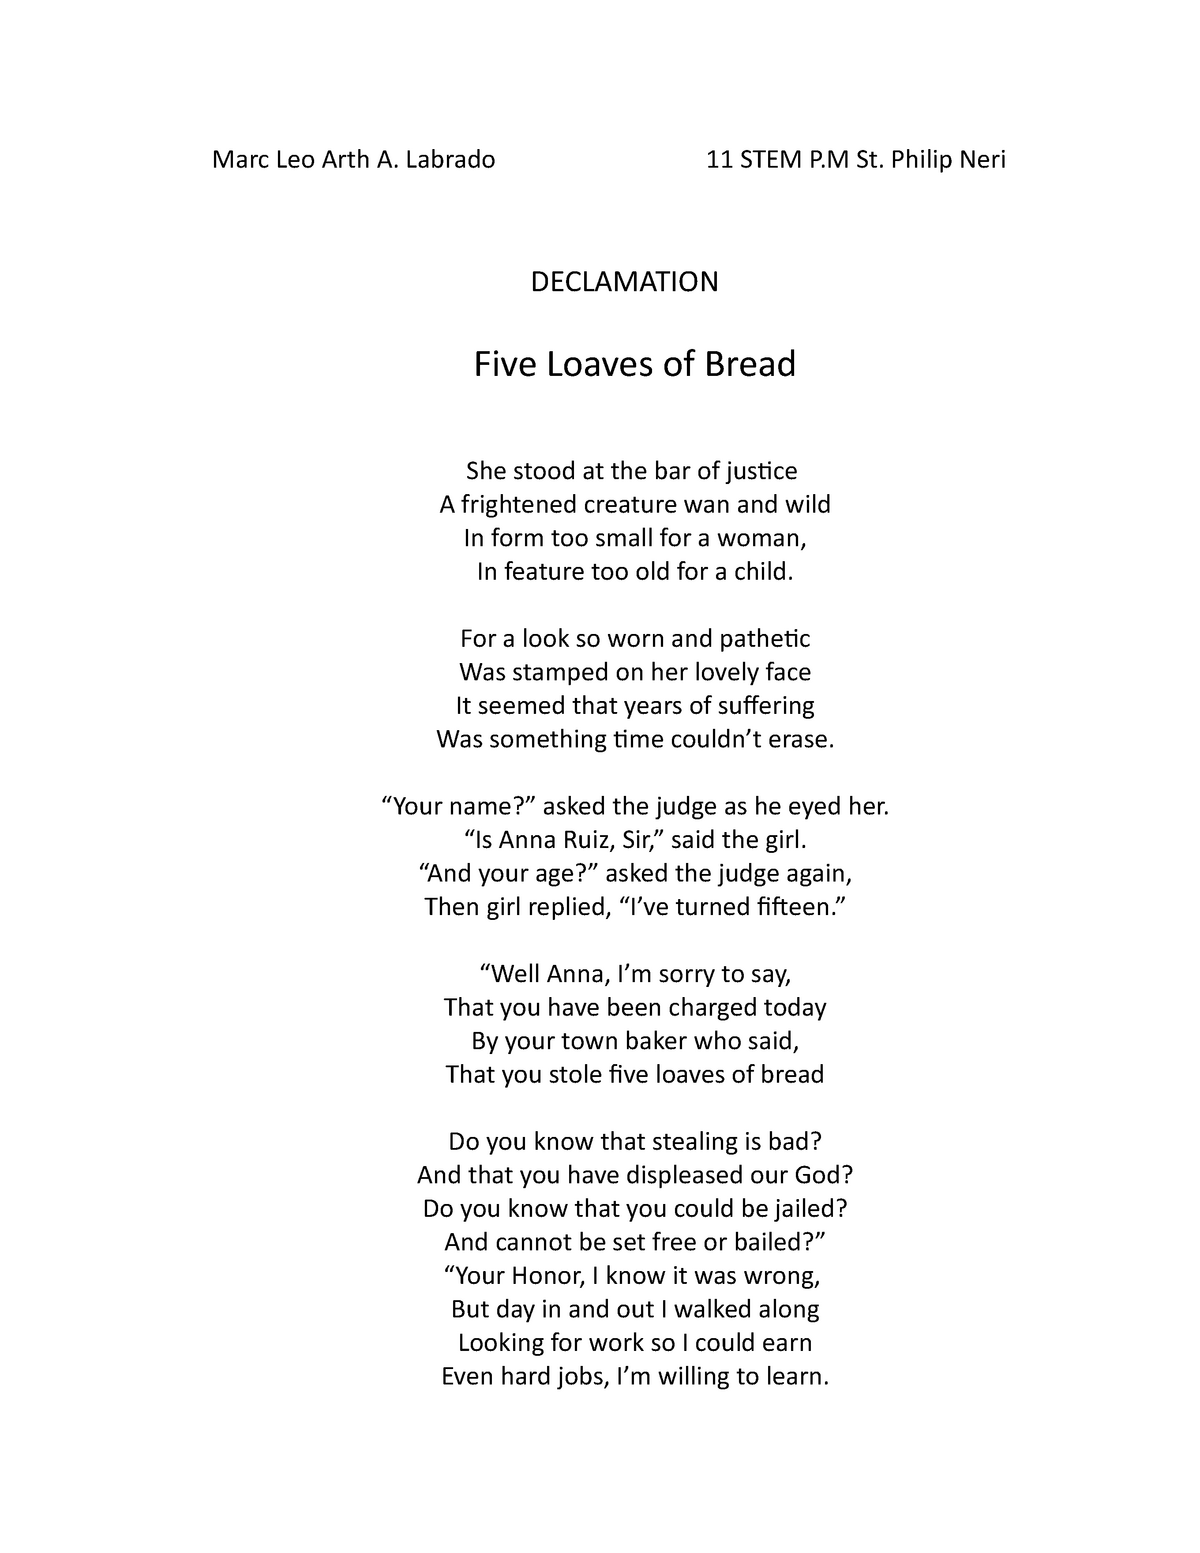 five loaves of bread declamation